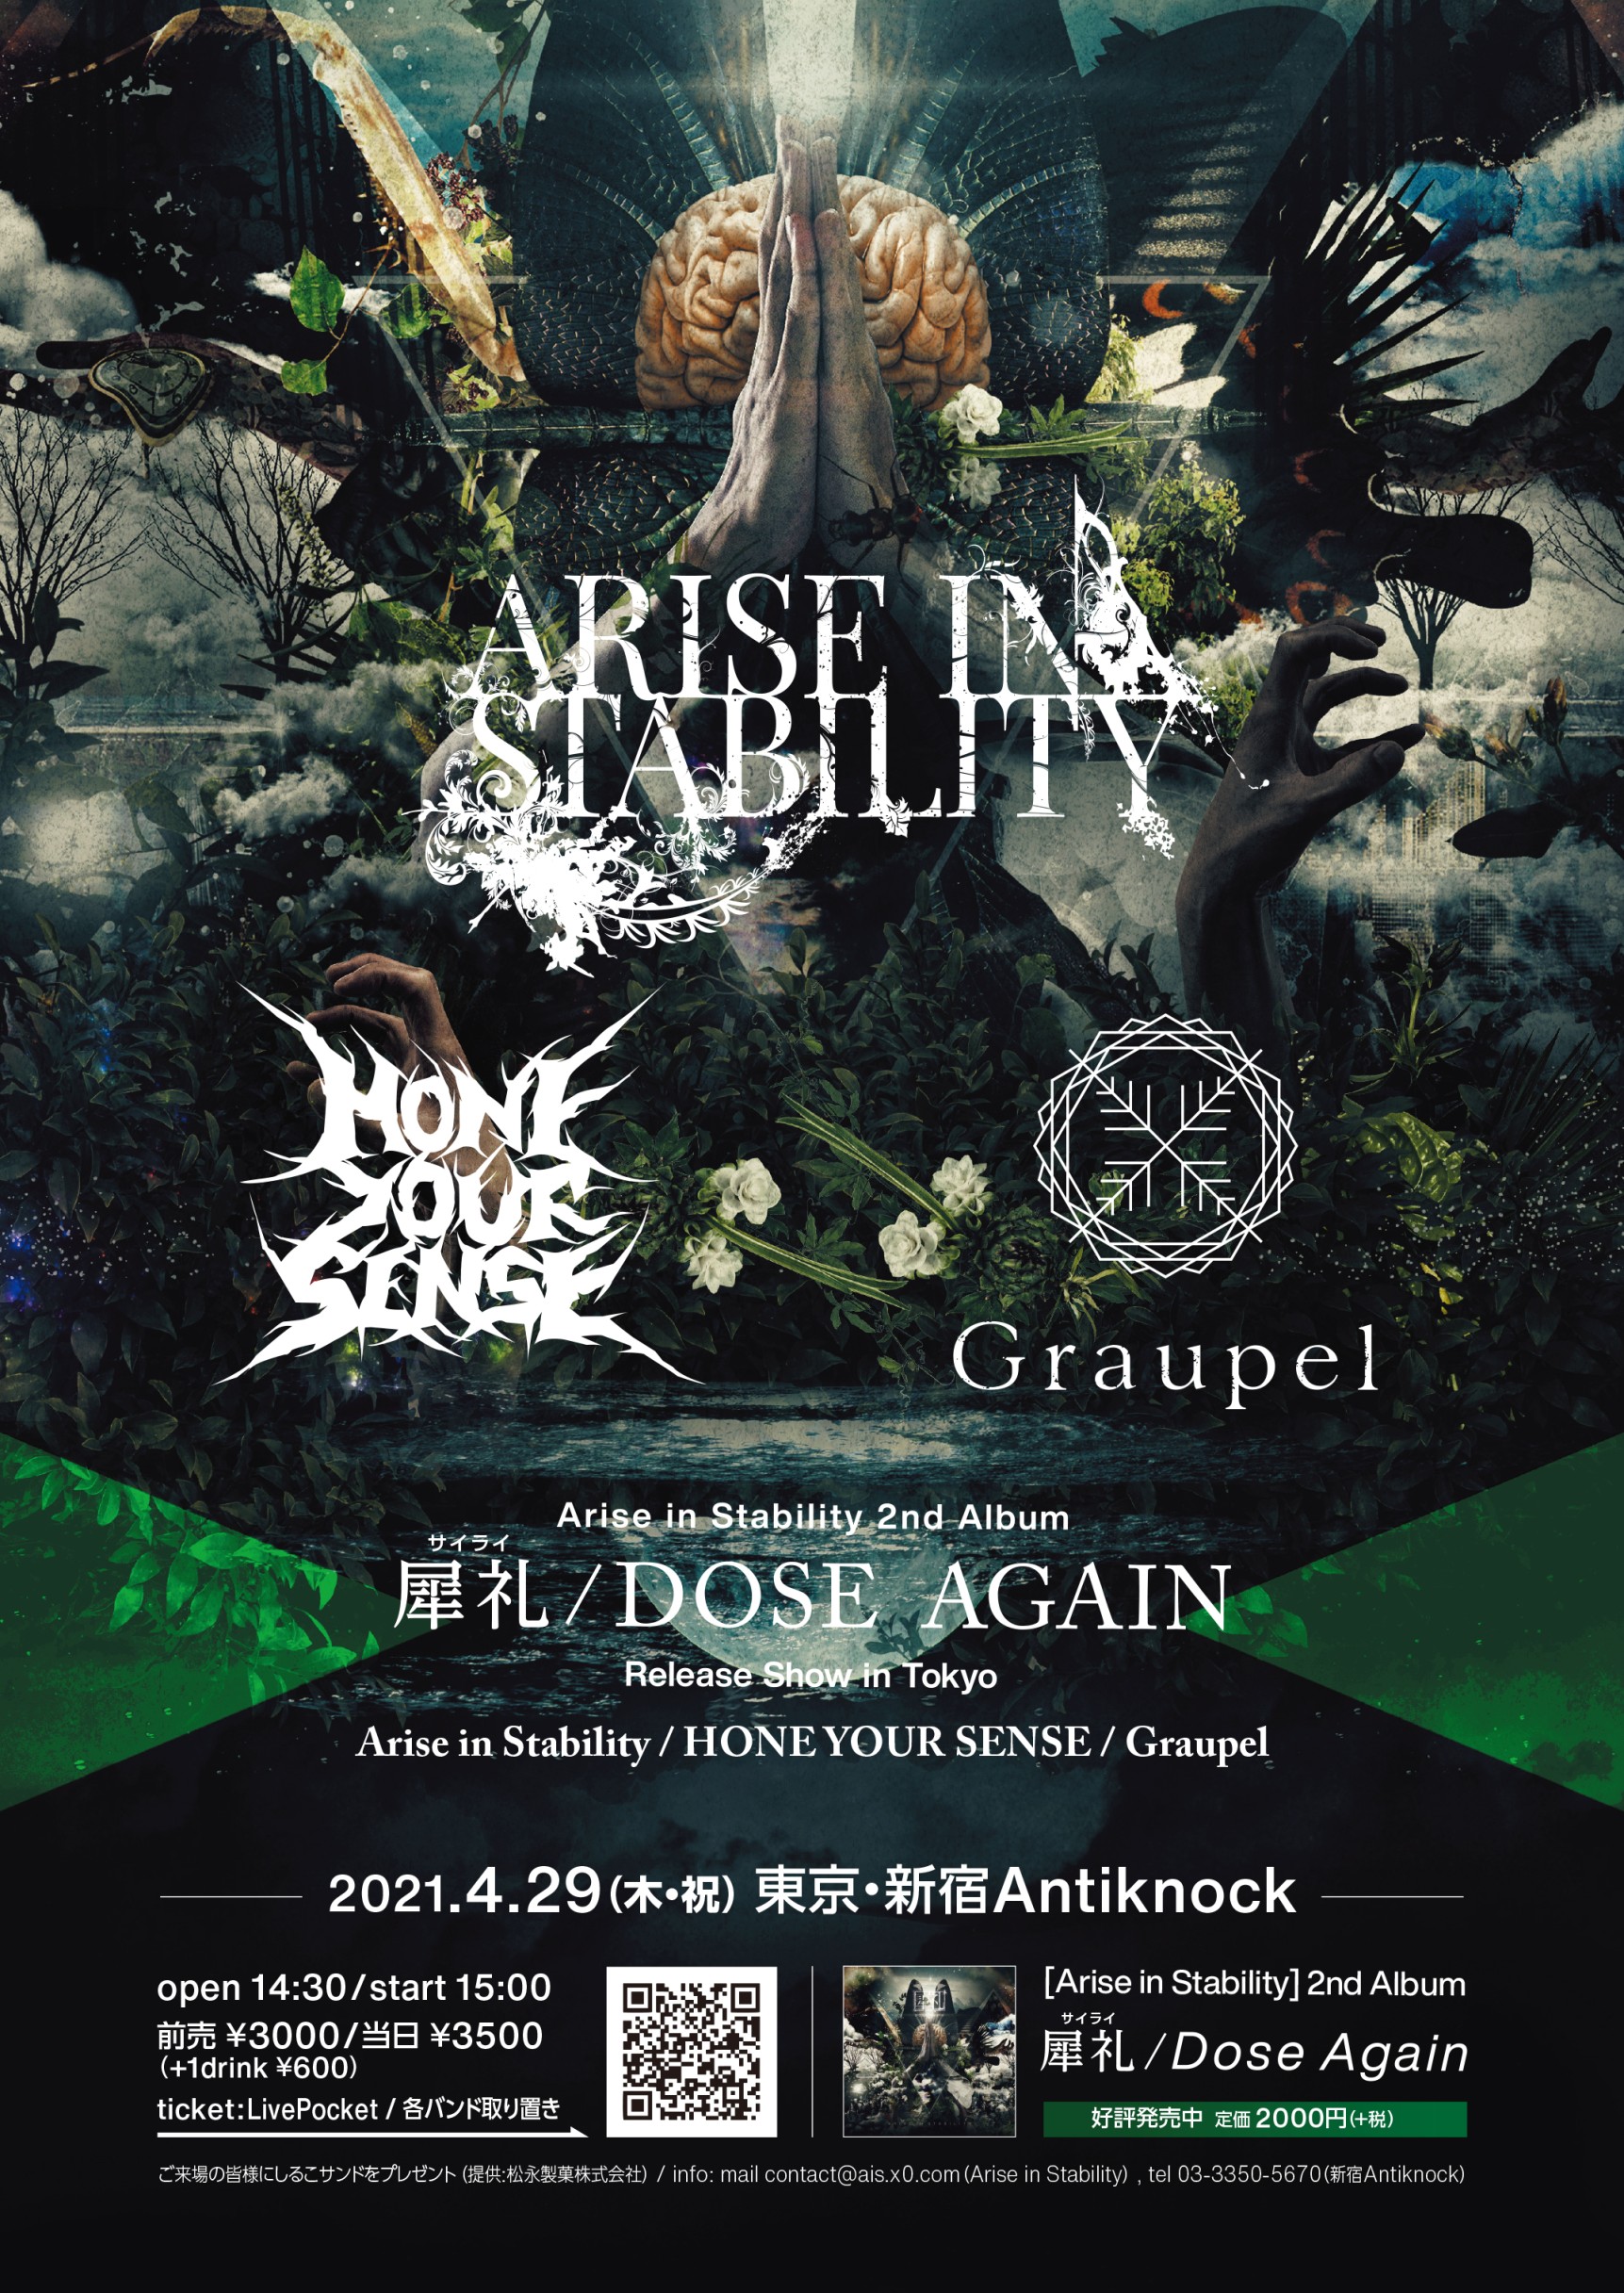 Arise in Stability 2nd album "Dose Again" release show